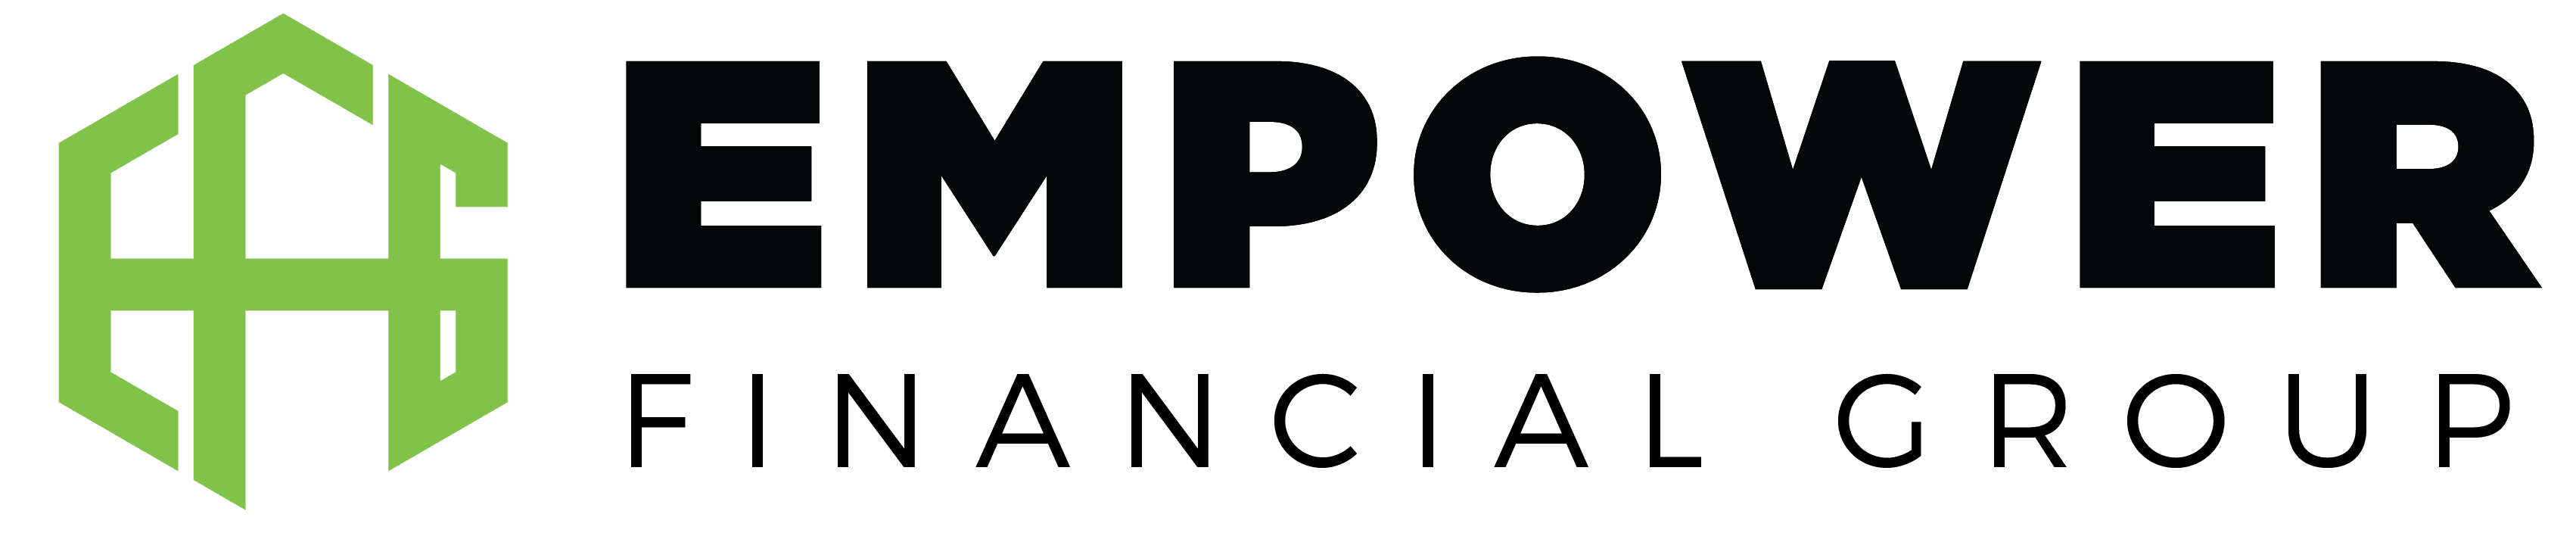 Empower Financial Group USA